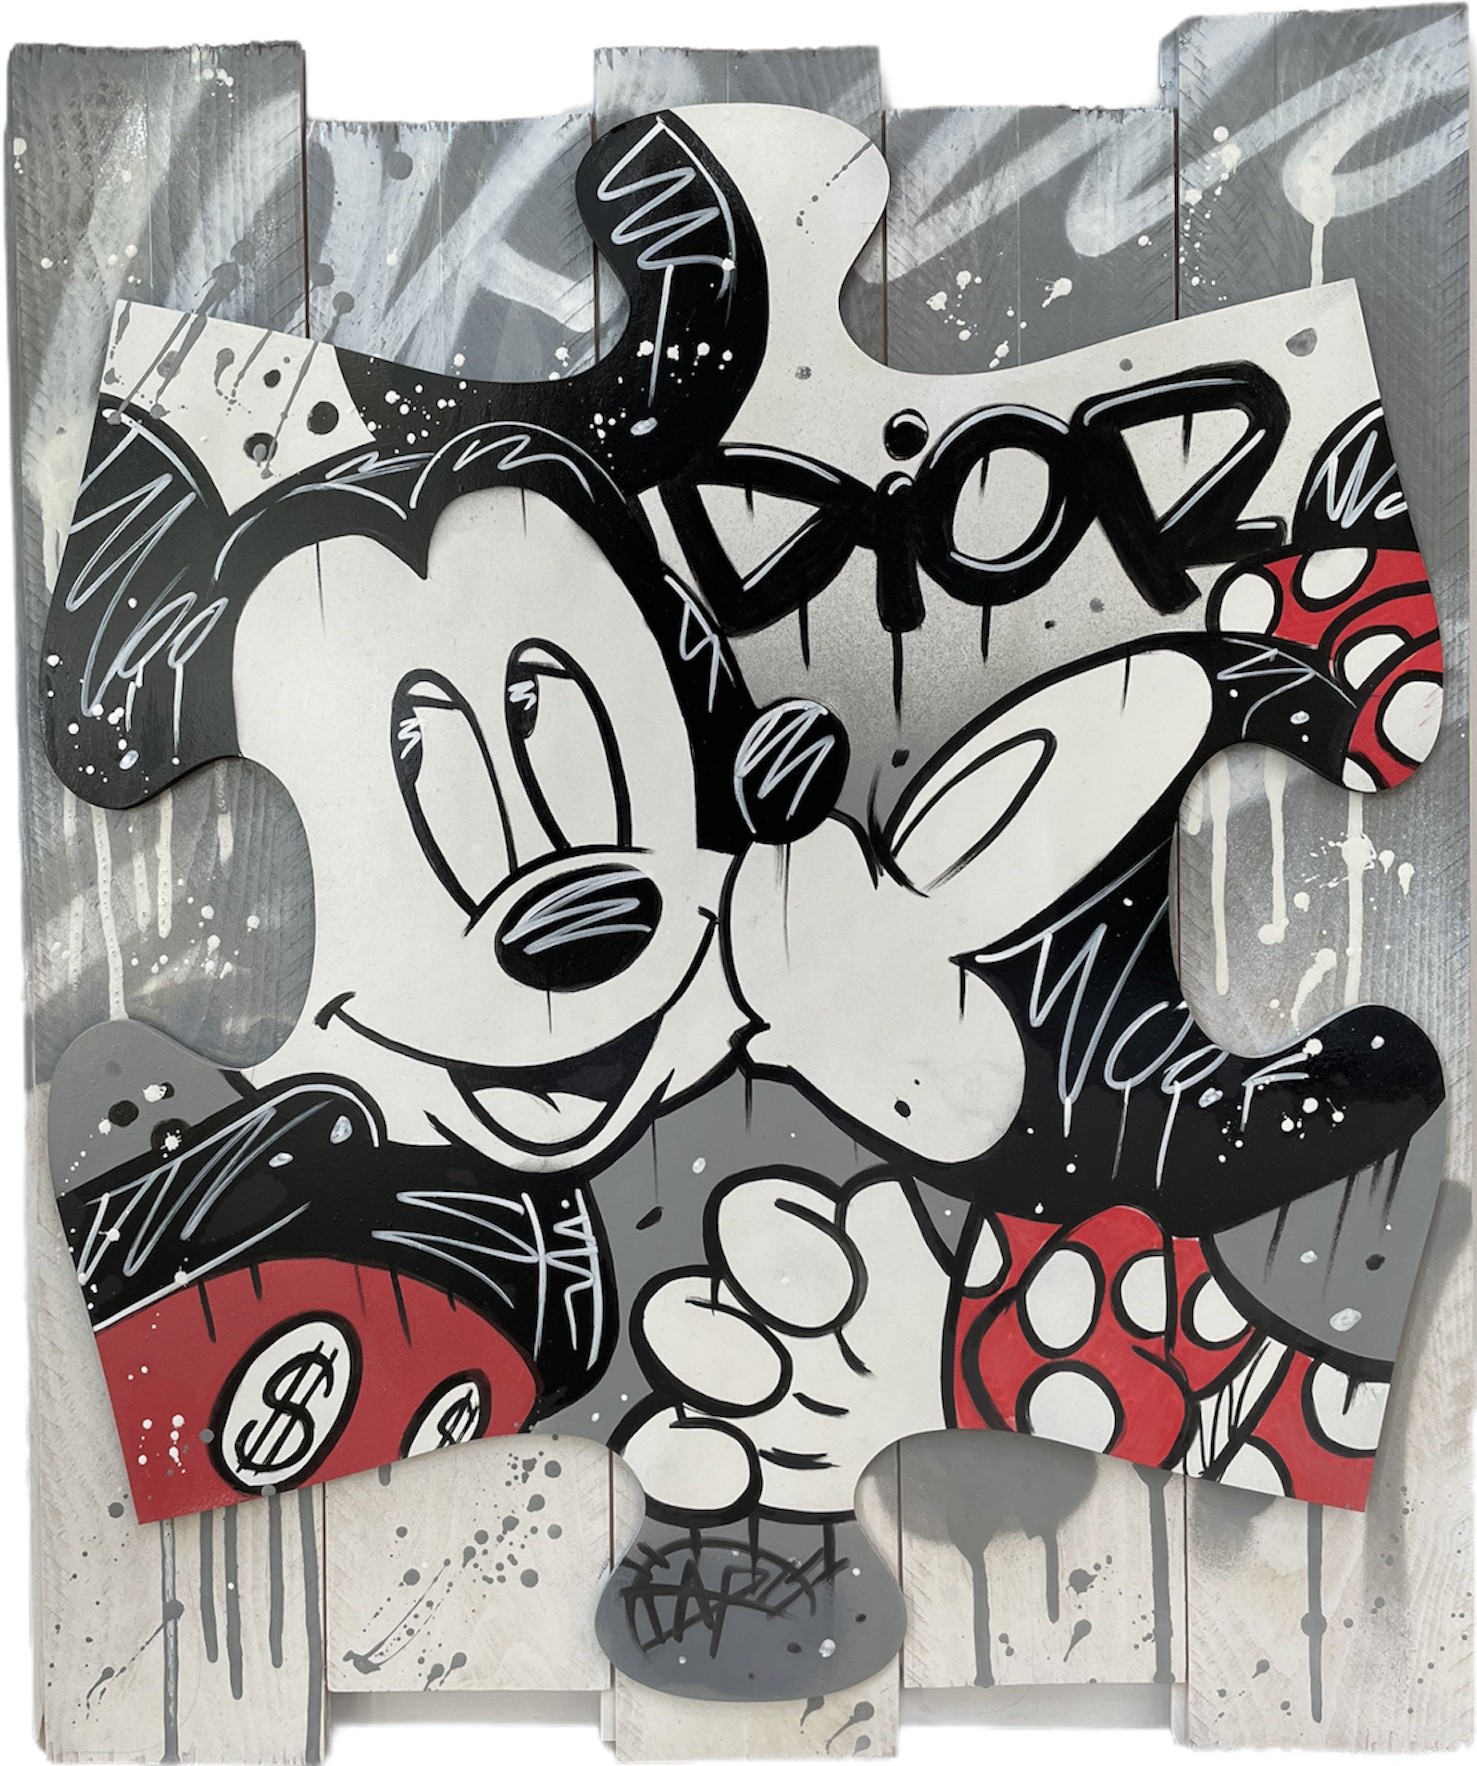 minnie mouse and mickey mouse in love drawing